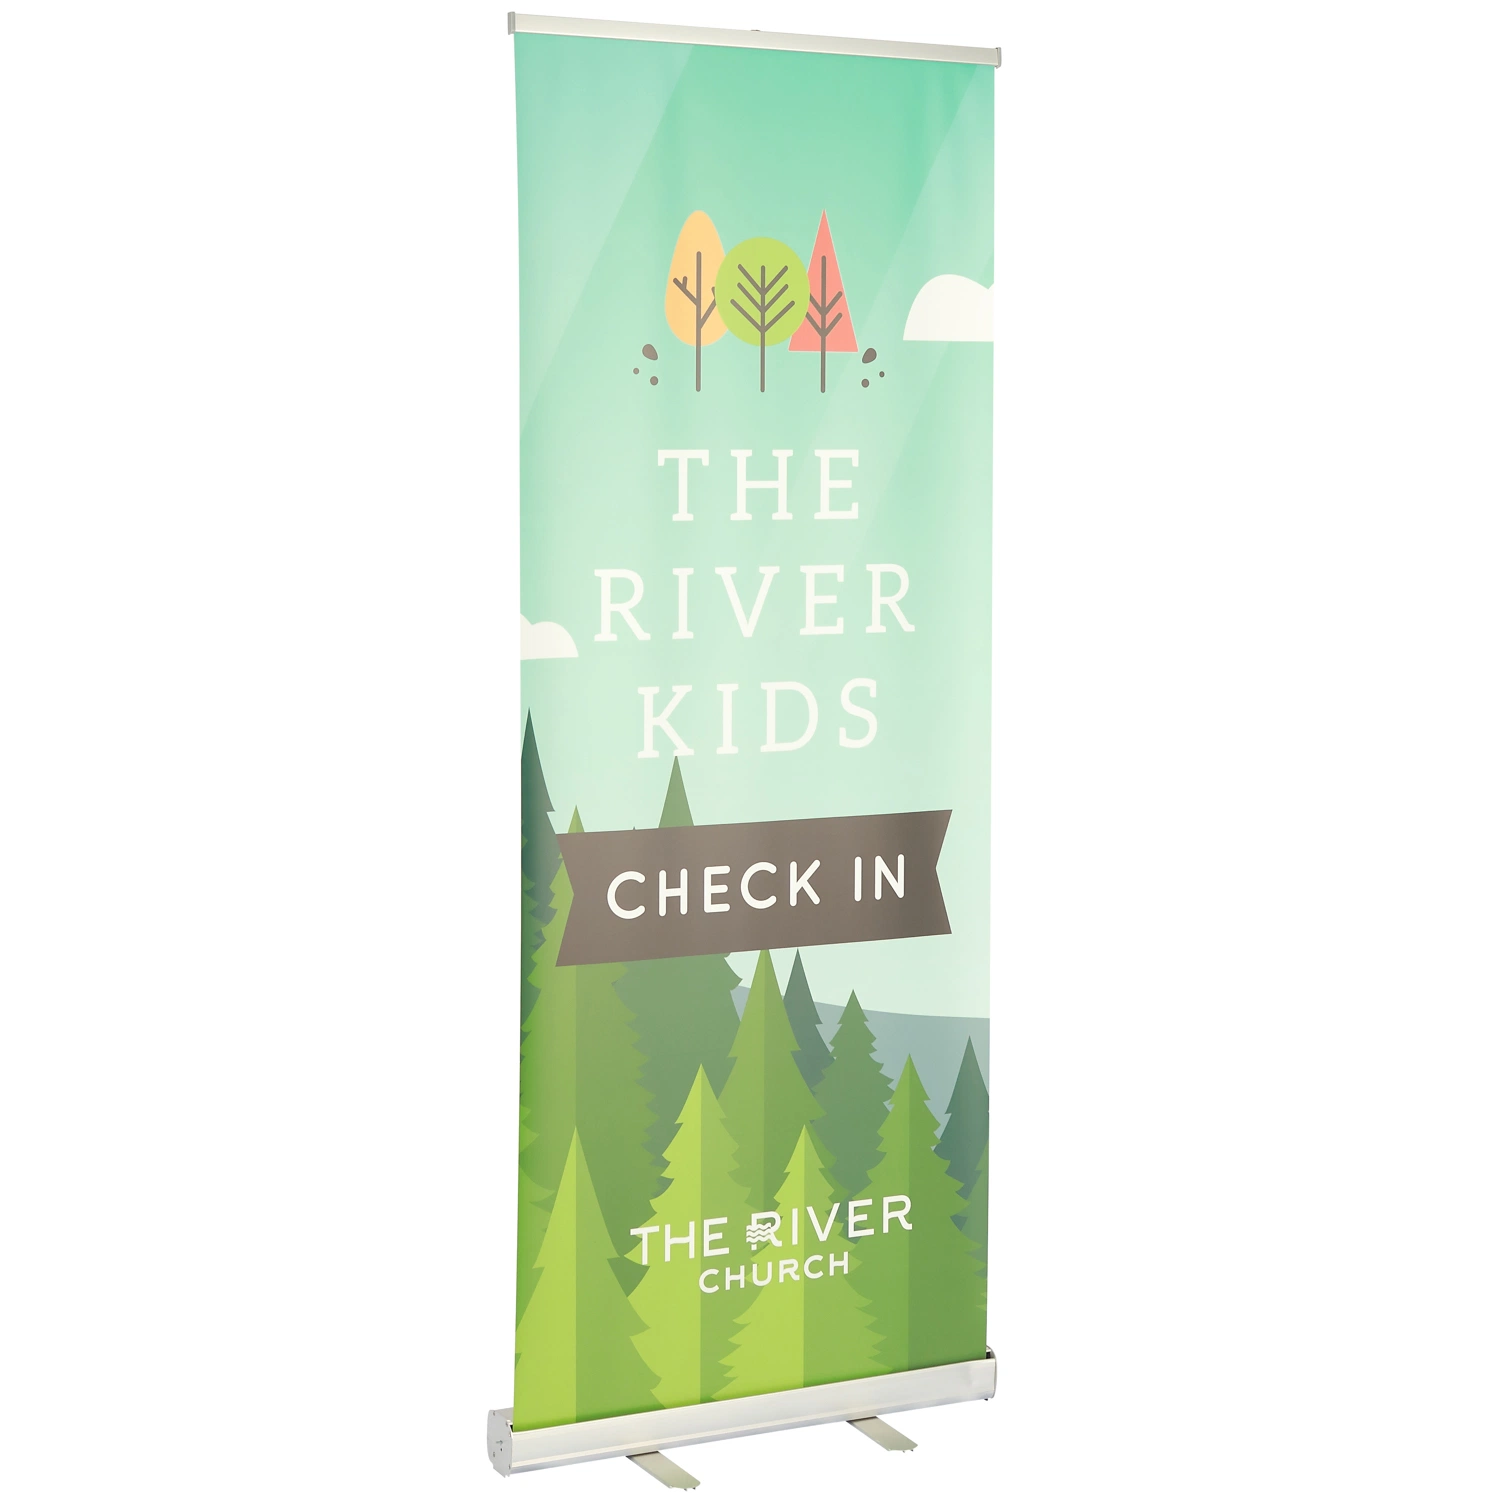 Portable Retractable Roll up Pull up Banner Stand up Banner